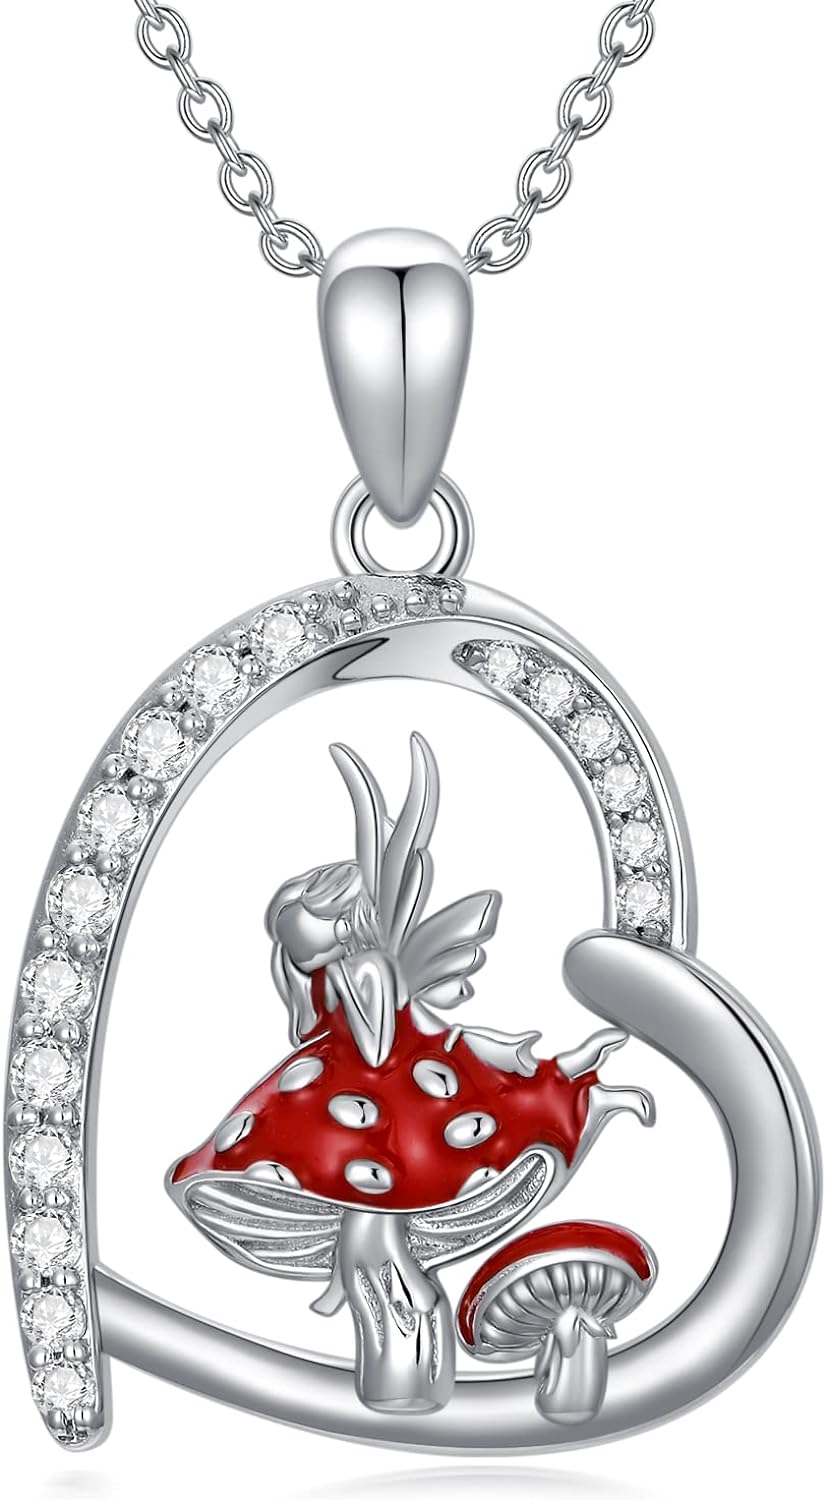 Adorable Frog Pendant Necklace Rhodium Plated Gift Boxed Mother and Baby Frog